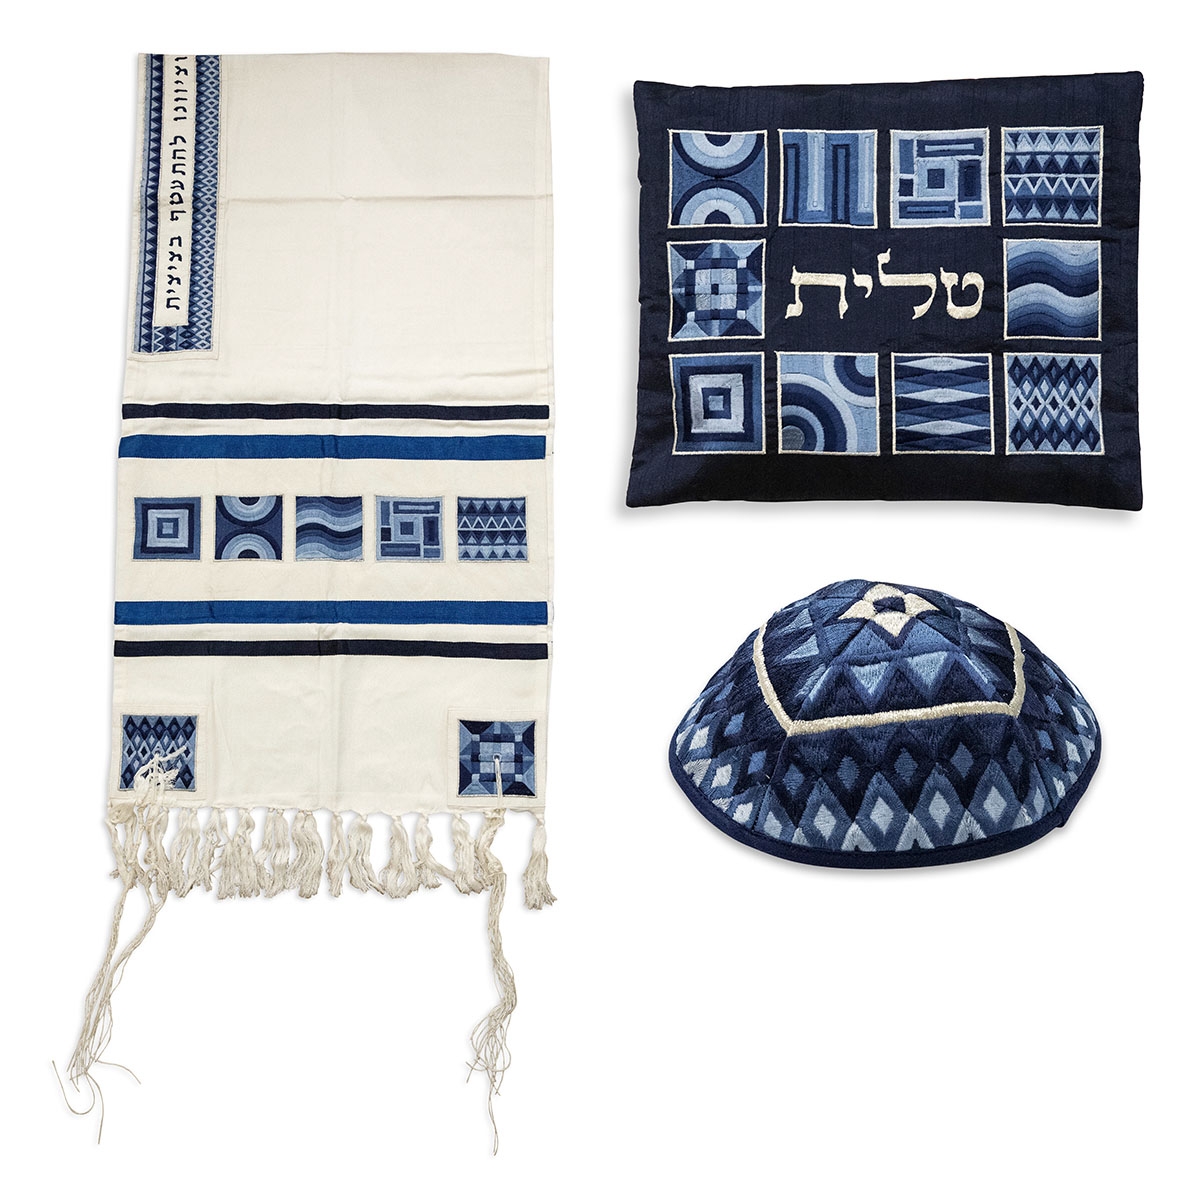 Yair Emanuel Embroidered Tallit Prayer Shawl Set With Blue Square Patterns - 1